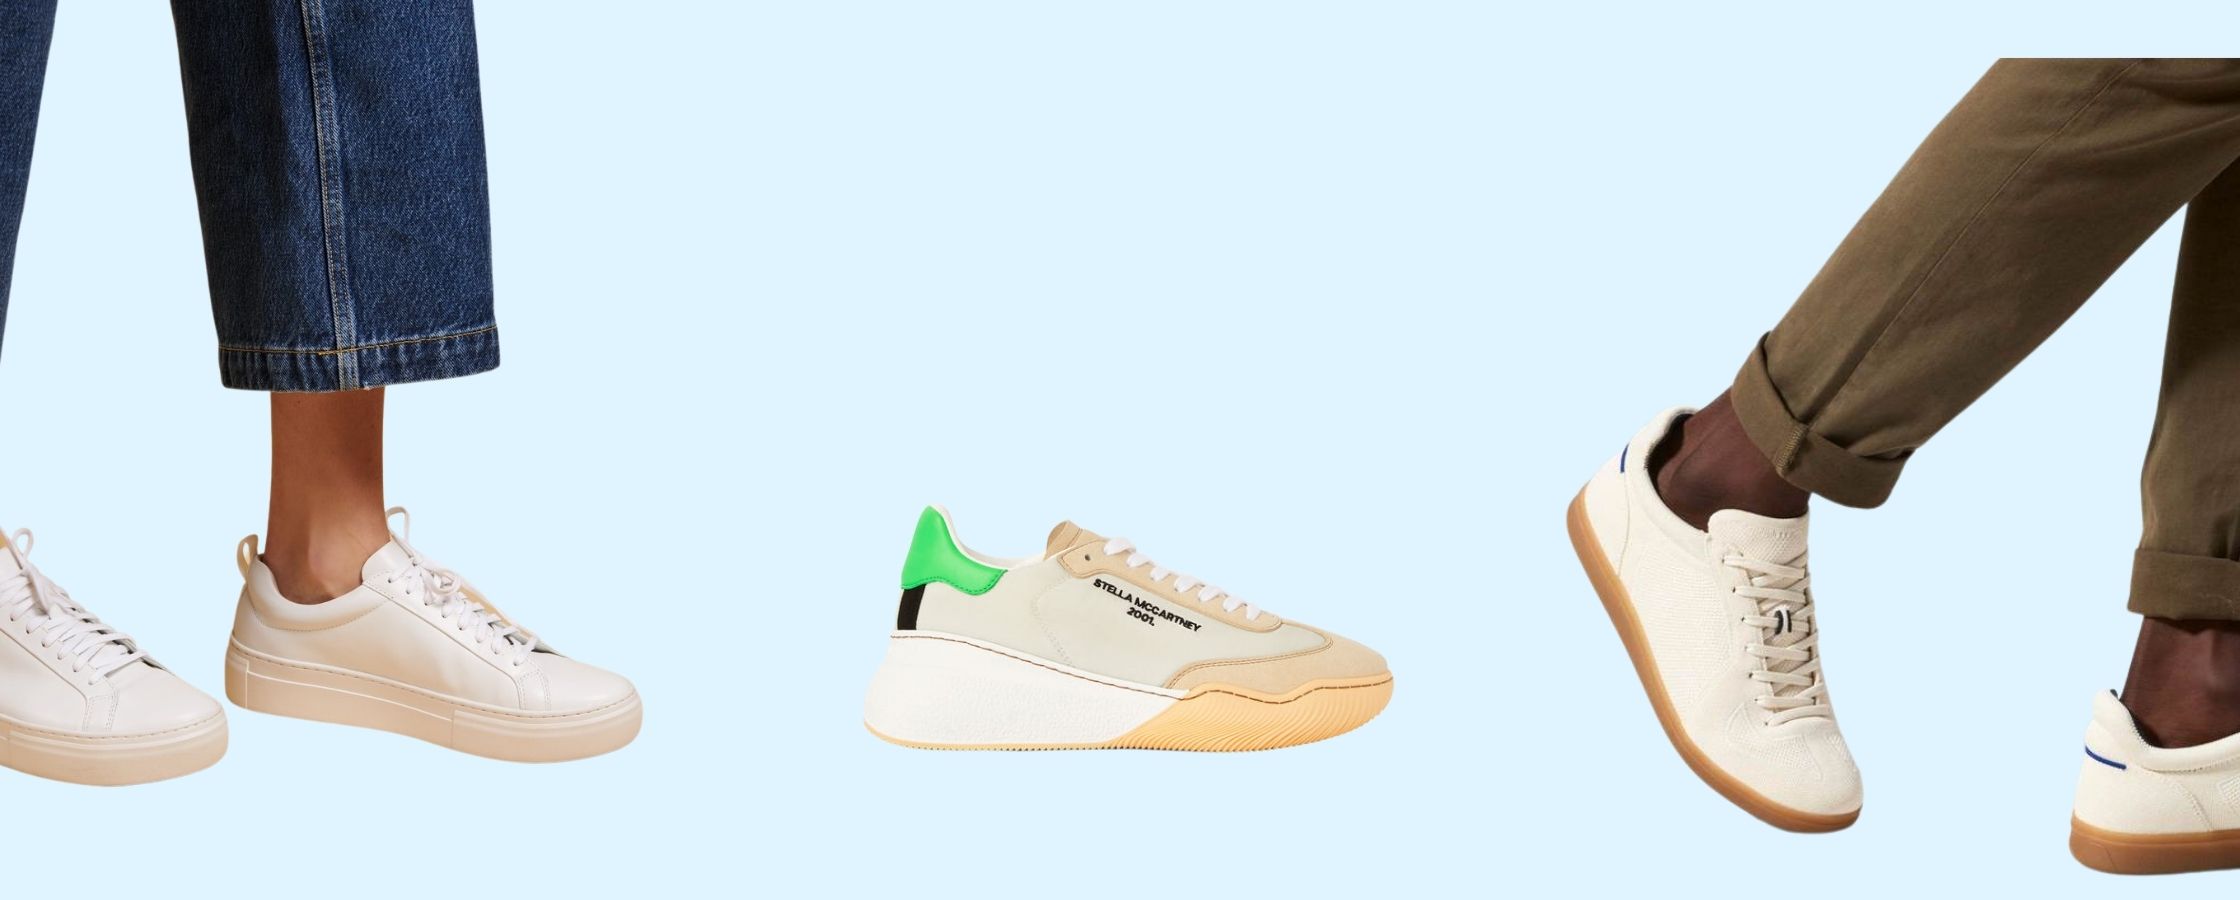 20 Sustainable Sneaker Brands to Minimize Your Footprint